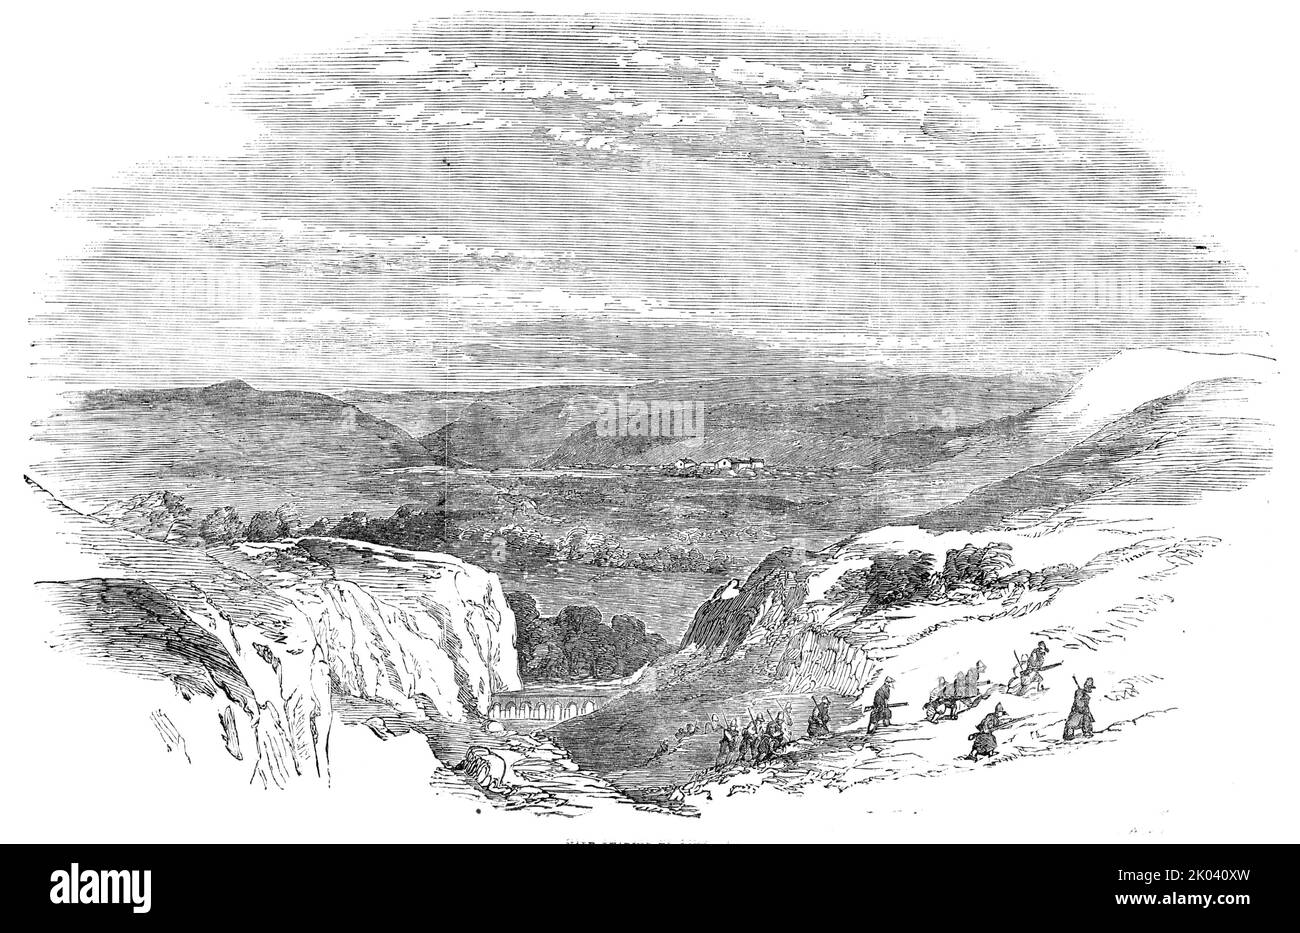 Vale leading to Inkerman, 1854. Crimean War, ruins at Kalamita. 'Here is truly a city of caverns, for the white rocks that look over the bay of Aktiar (which, translated, signifies White Rocks), are excavations of a most extraordinary character. These consist of chambers with Gothic windows, cut out of the solid stone. Near the harbour the rocks are hewn into chapels, monasteries, and sepulchres. These are considered by some authorities to have been the retreats of Christians in the early ages. There are several Grecian antiquities in the neighbourhood of the ruined town...but the Russians, wi Stock Photo